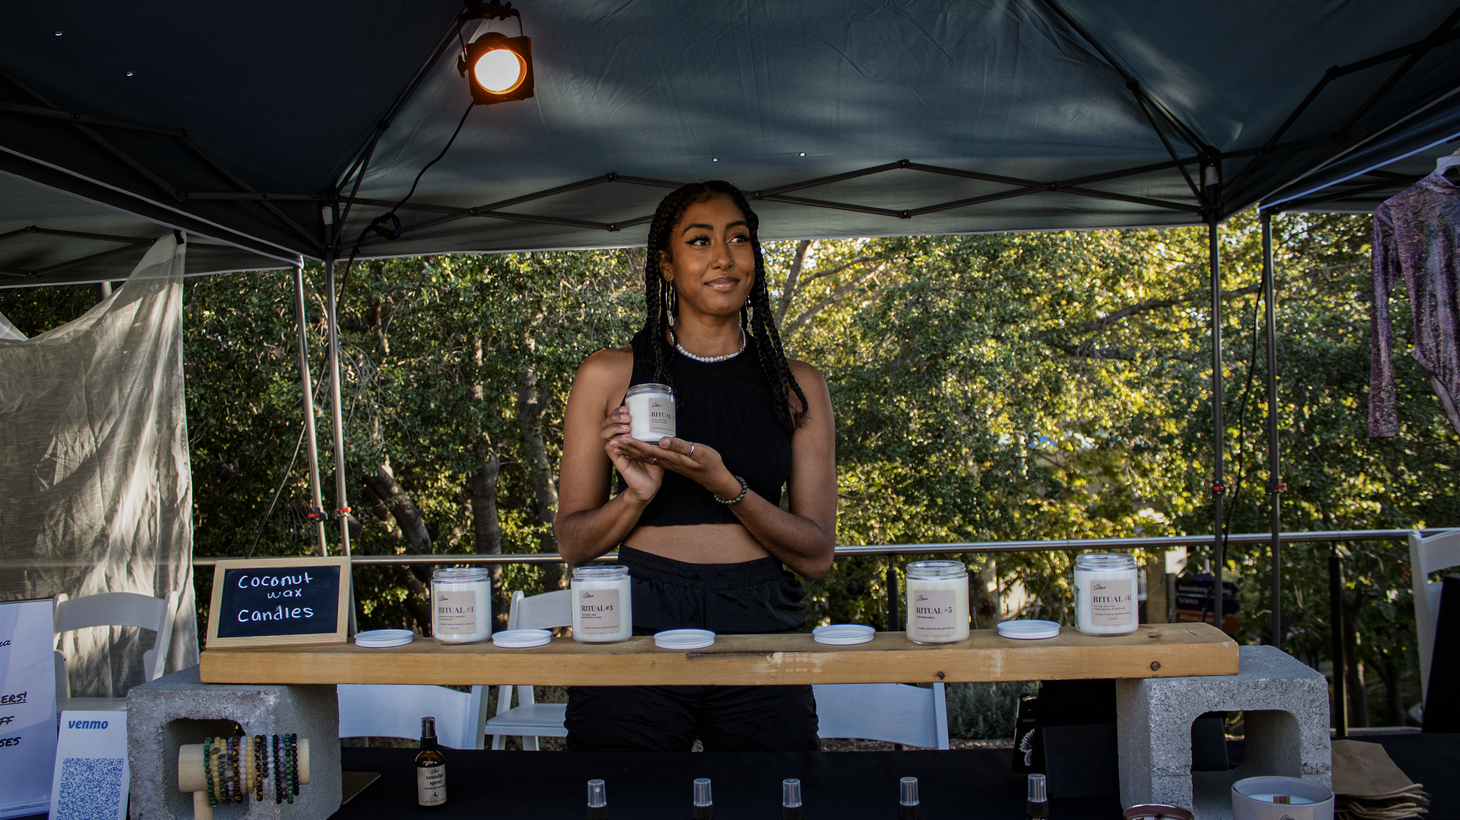 Atma sells handpicked and handmade products with natural and clean ingredients. Photo by JSJ Collective.